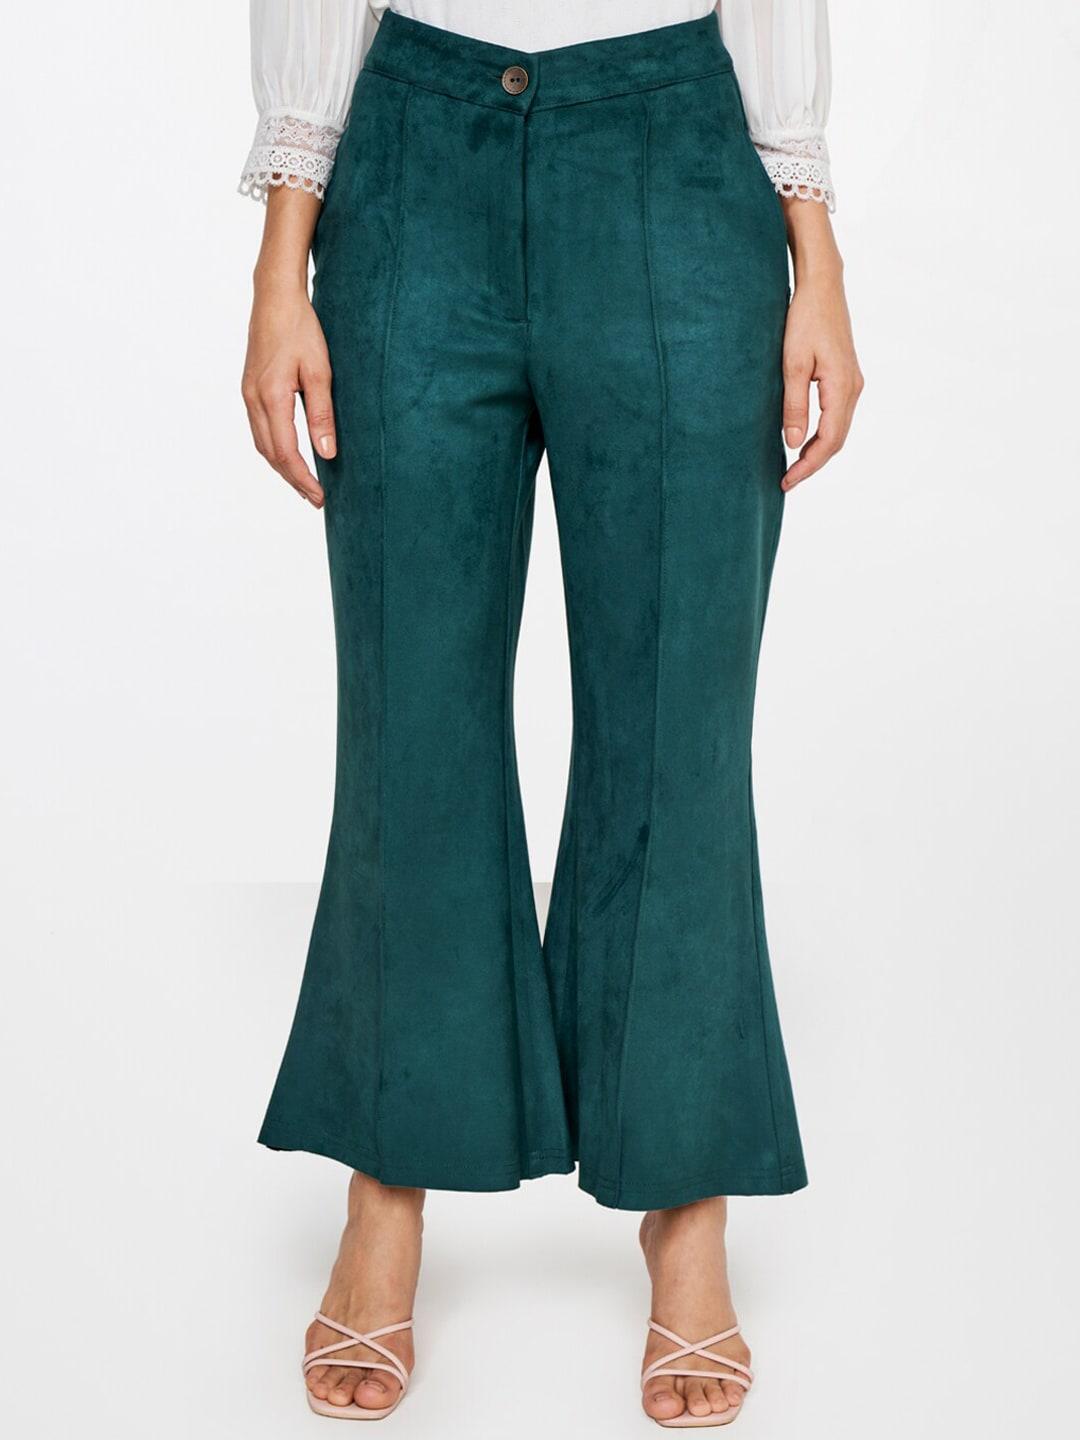 and-women-green-flared-trousers